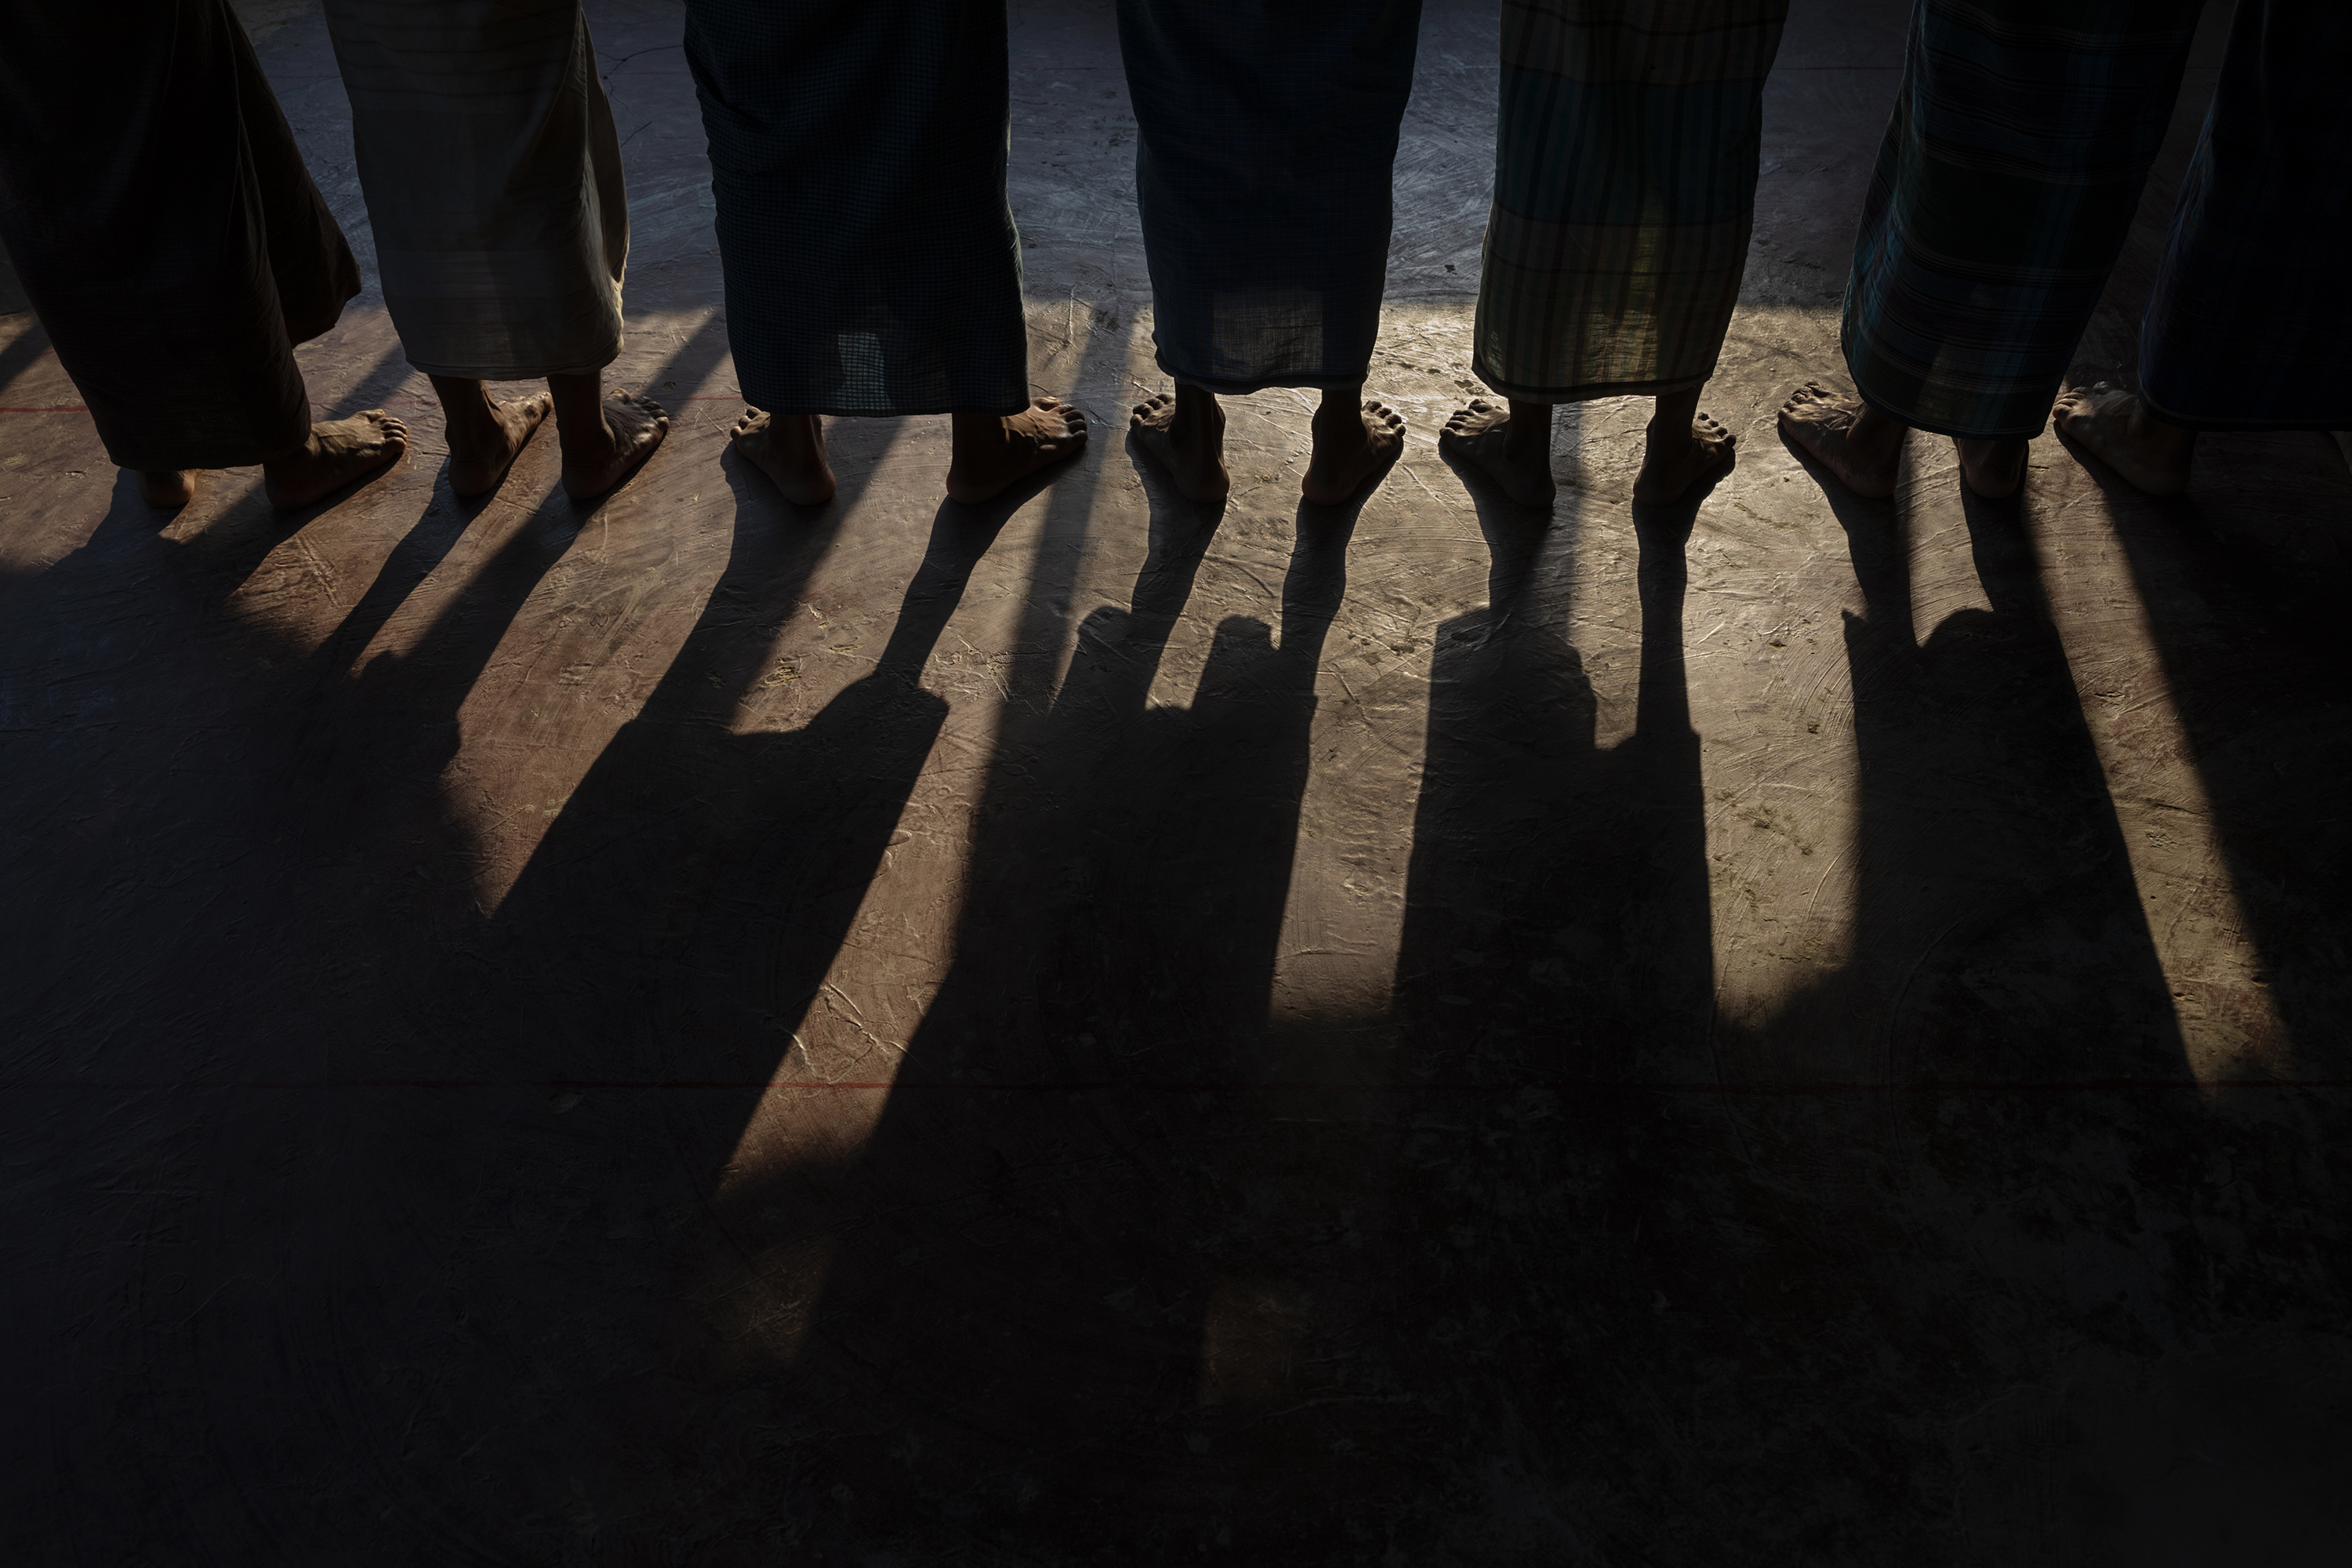 Men stand during afternoon prayers at a mosque. (James Nachtwey for TIME)